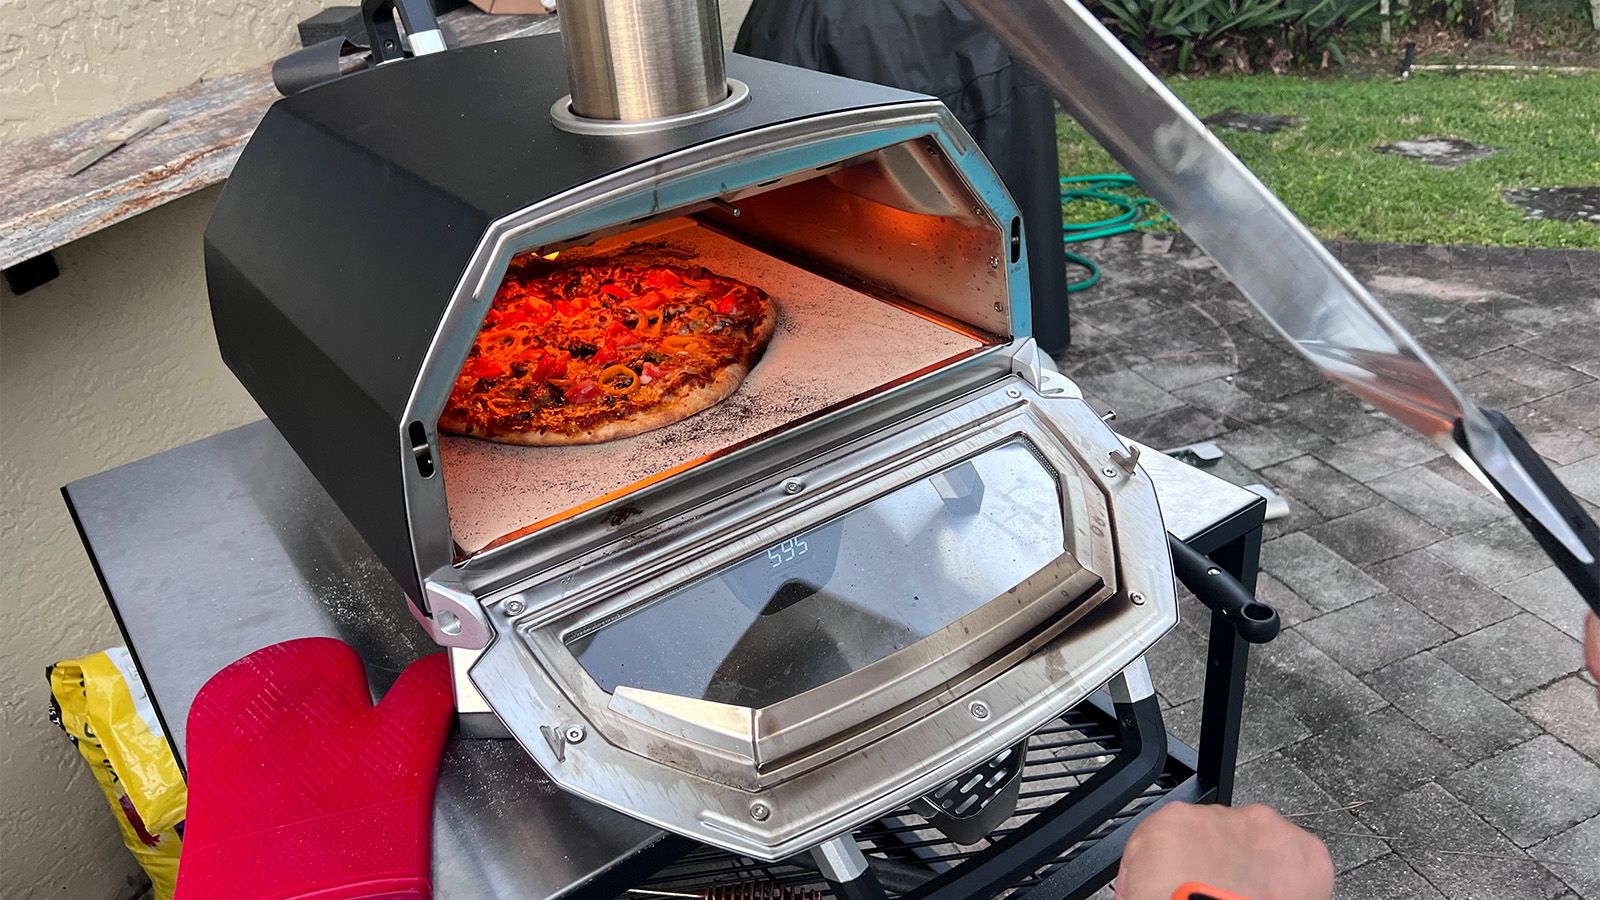 Ooni Pro 16 Outdoor Pizza Oven, Pizza Maker, Wood-fired Pizza Oven, Gas  Oven, Award Winning Pizza Oven